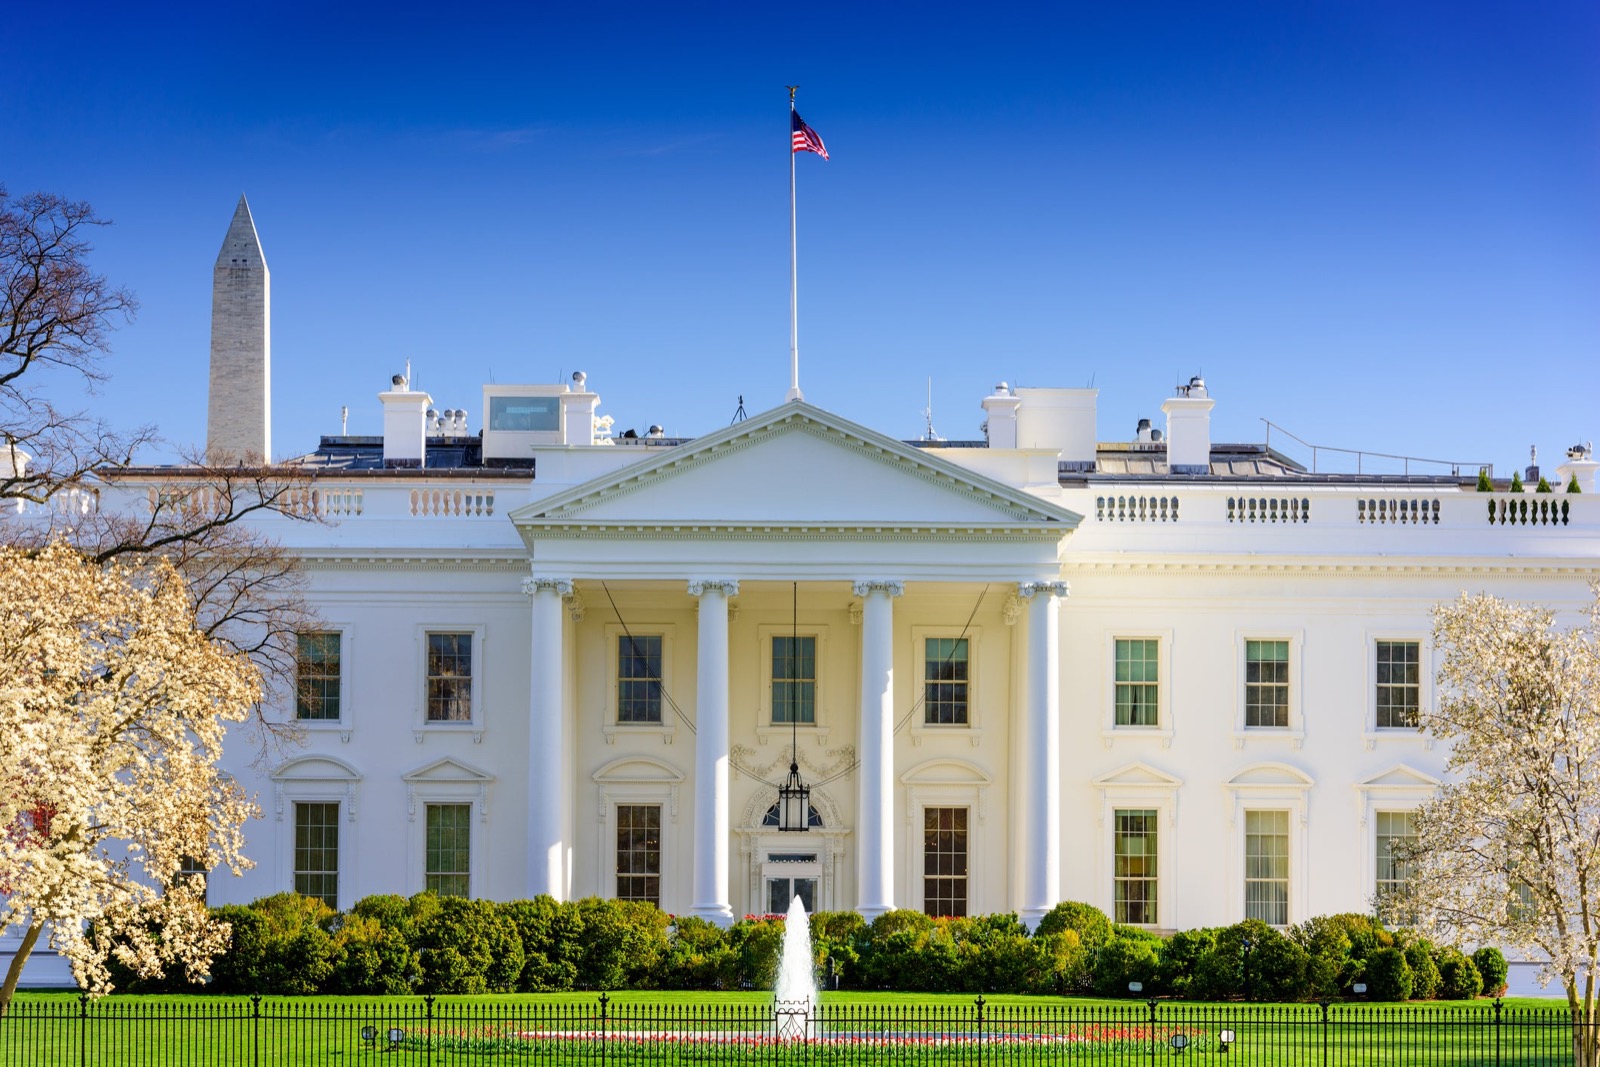 If You Get Over 80% On This Random Knowledge Quiz, You Know a Lot White House Us Government